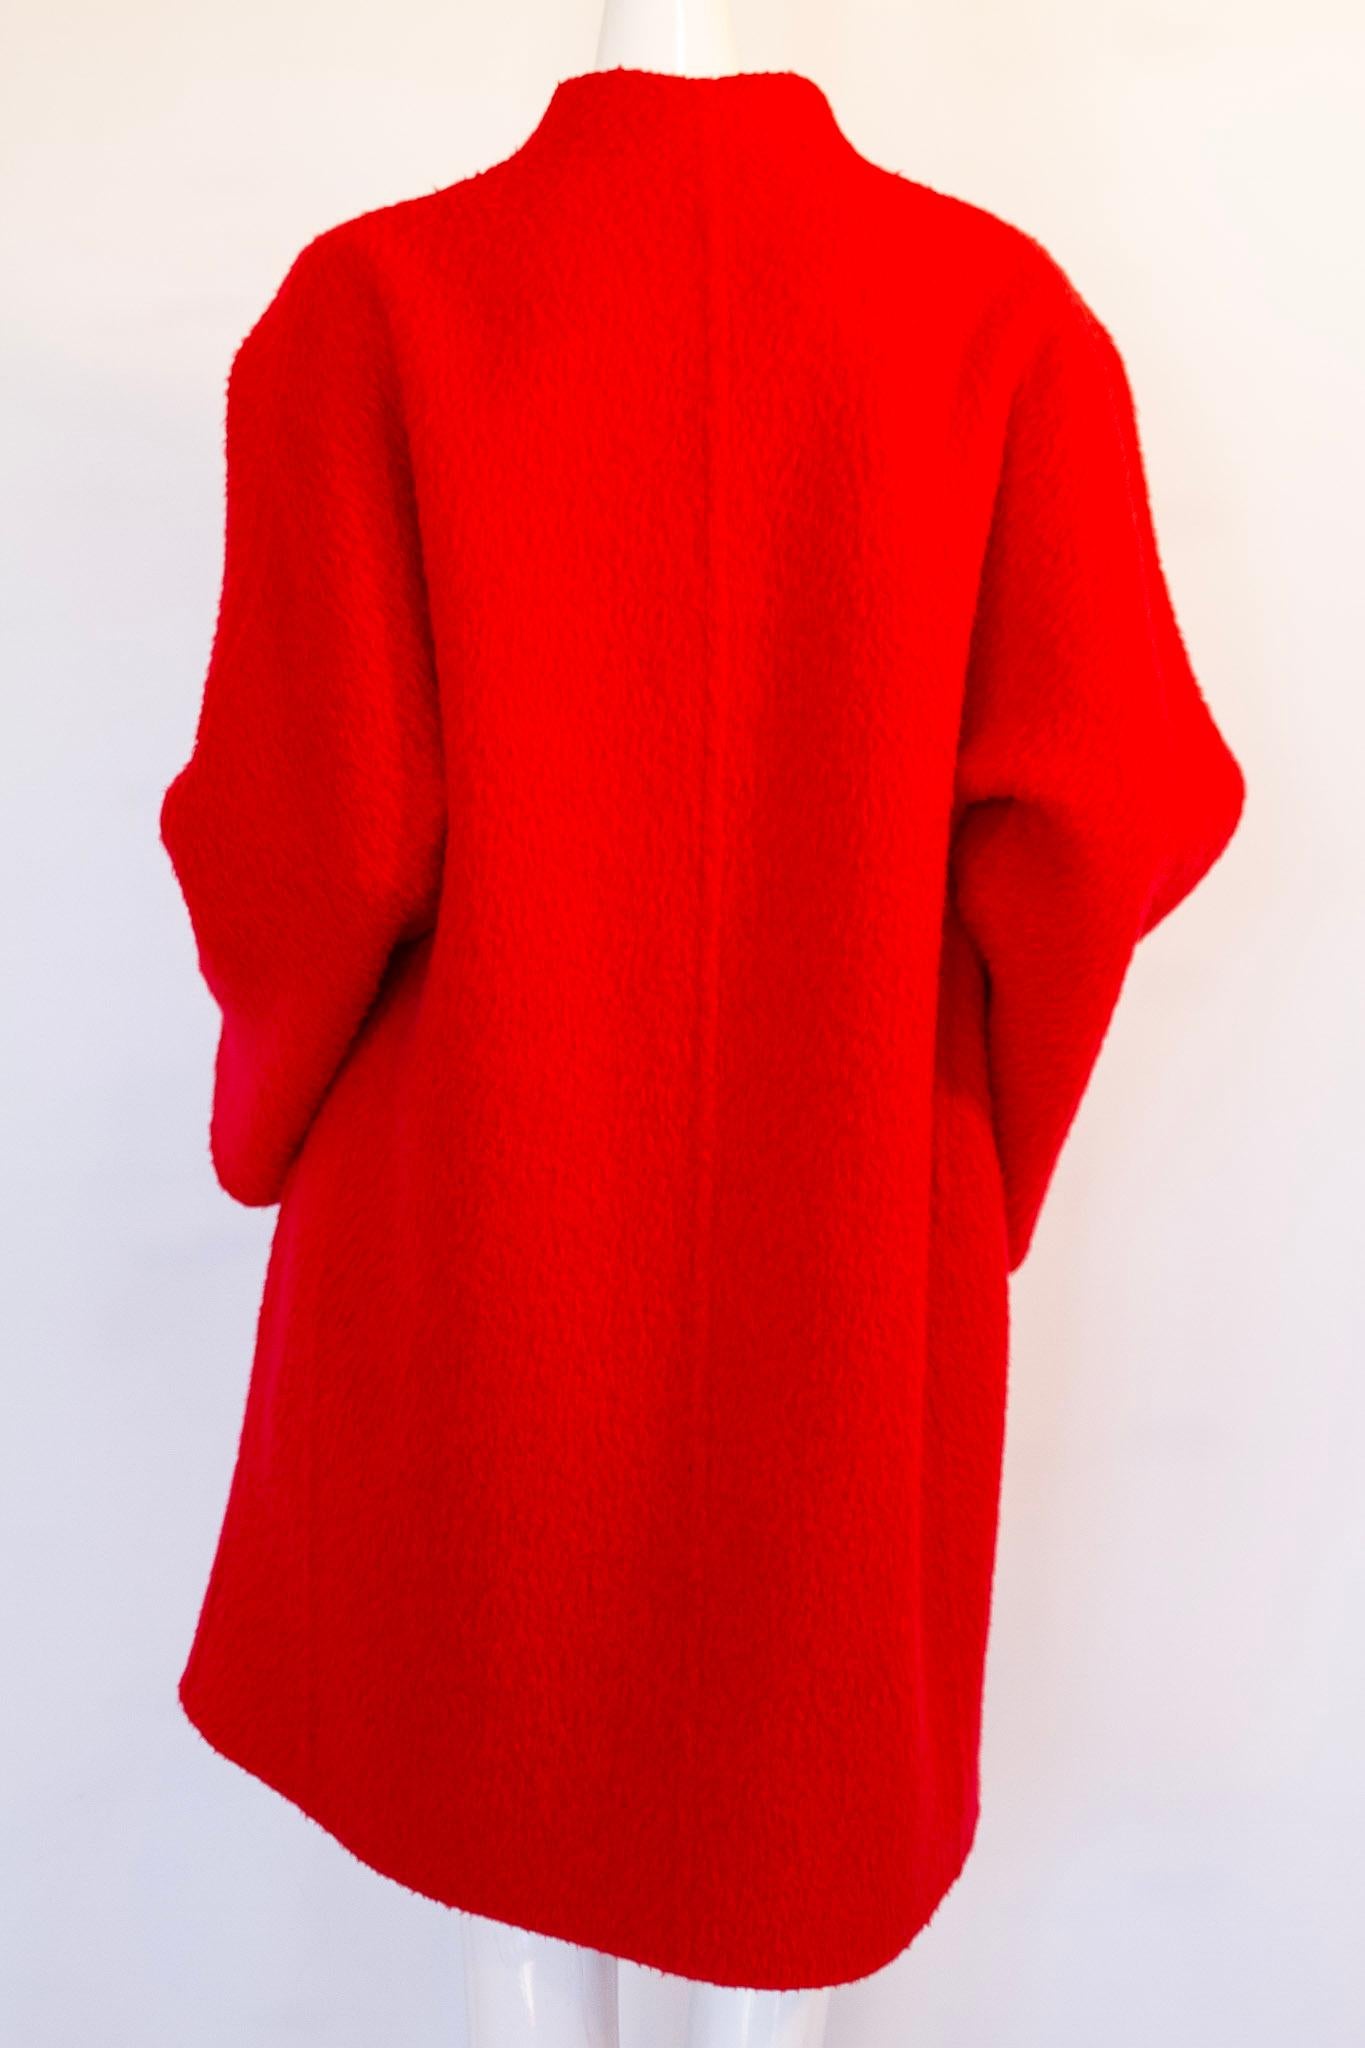 Gianfranco Ferre, Red, Wool and Alpaca, Cocoon Coat, 1978 In New Condition For Sale In Kingston, NY